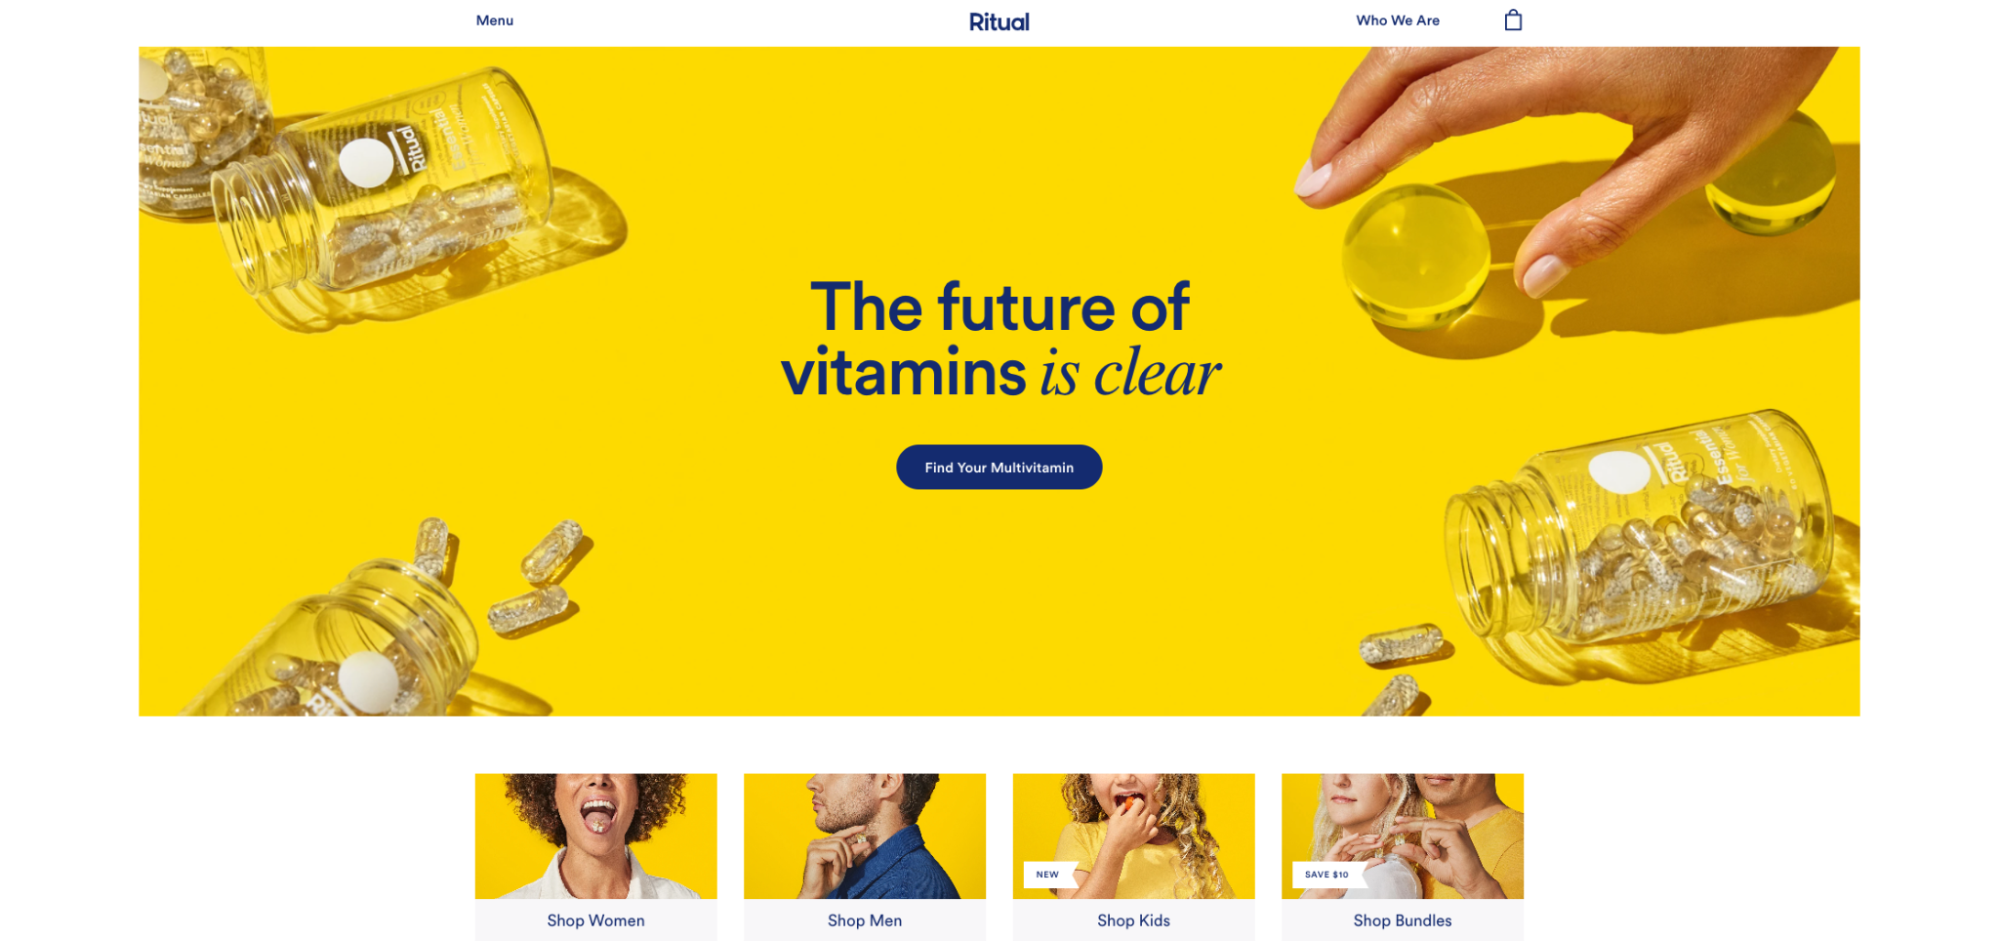 The homepage for vitamin brand Ritual designed by Simplistic